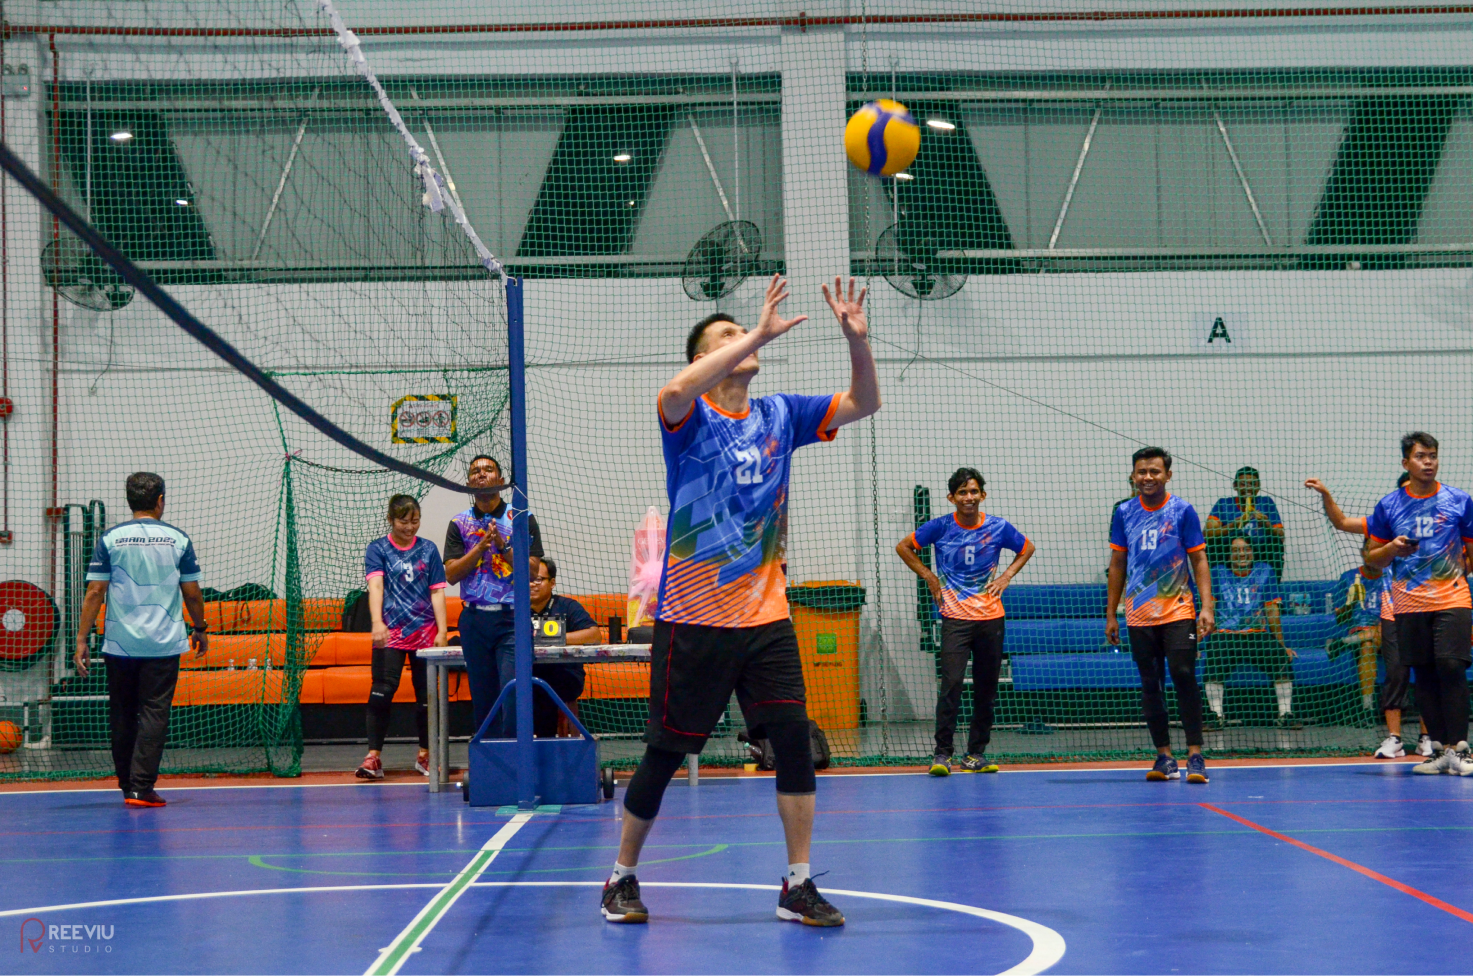 Sepang Aircraft Engineering (SAE) recently organised a volleyball friendly match where our colleagues competed against formidable players from Air Selangor. The competition kept the spirits of those who attended high and their adrenaline pumping throughout.  Players from both sides displayed remarkable sportsmanship and teamwork, showcasing the power of collaboration both in and out of the workplace.  What added an extra layer of excitement to the match was the participation of SAE's Managing Director and Airbus Chief Representative for Malaysia, Mr. Burhanudin Noordin Ali, as one of the players. This not only highlighted SAE's commitment to fostering a close-knit and inclusive environment, but also emphasised the importance of leading by example.  The volleyball event was more than just a game; it was also a reminder that unity and friendly competition can strengthen bonds and boost employee morale, and contribute to a more harmonious work environment. The SAE team can't wait to participate in more of such e